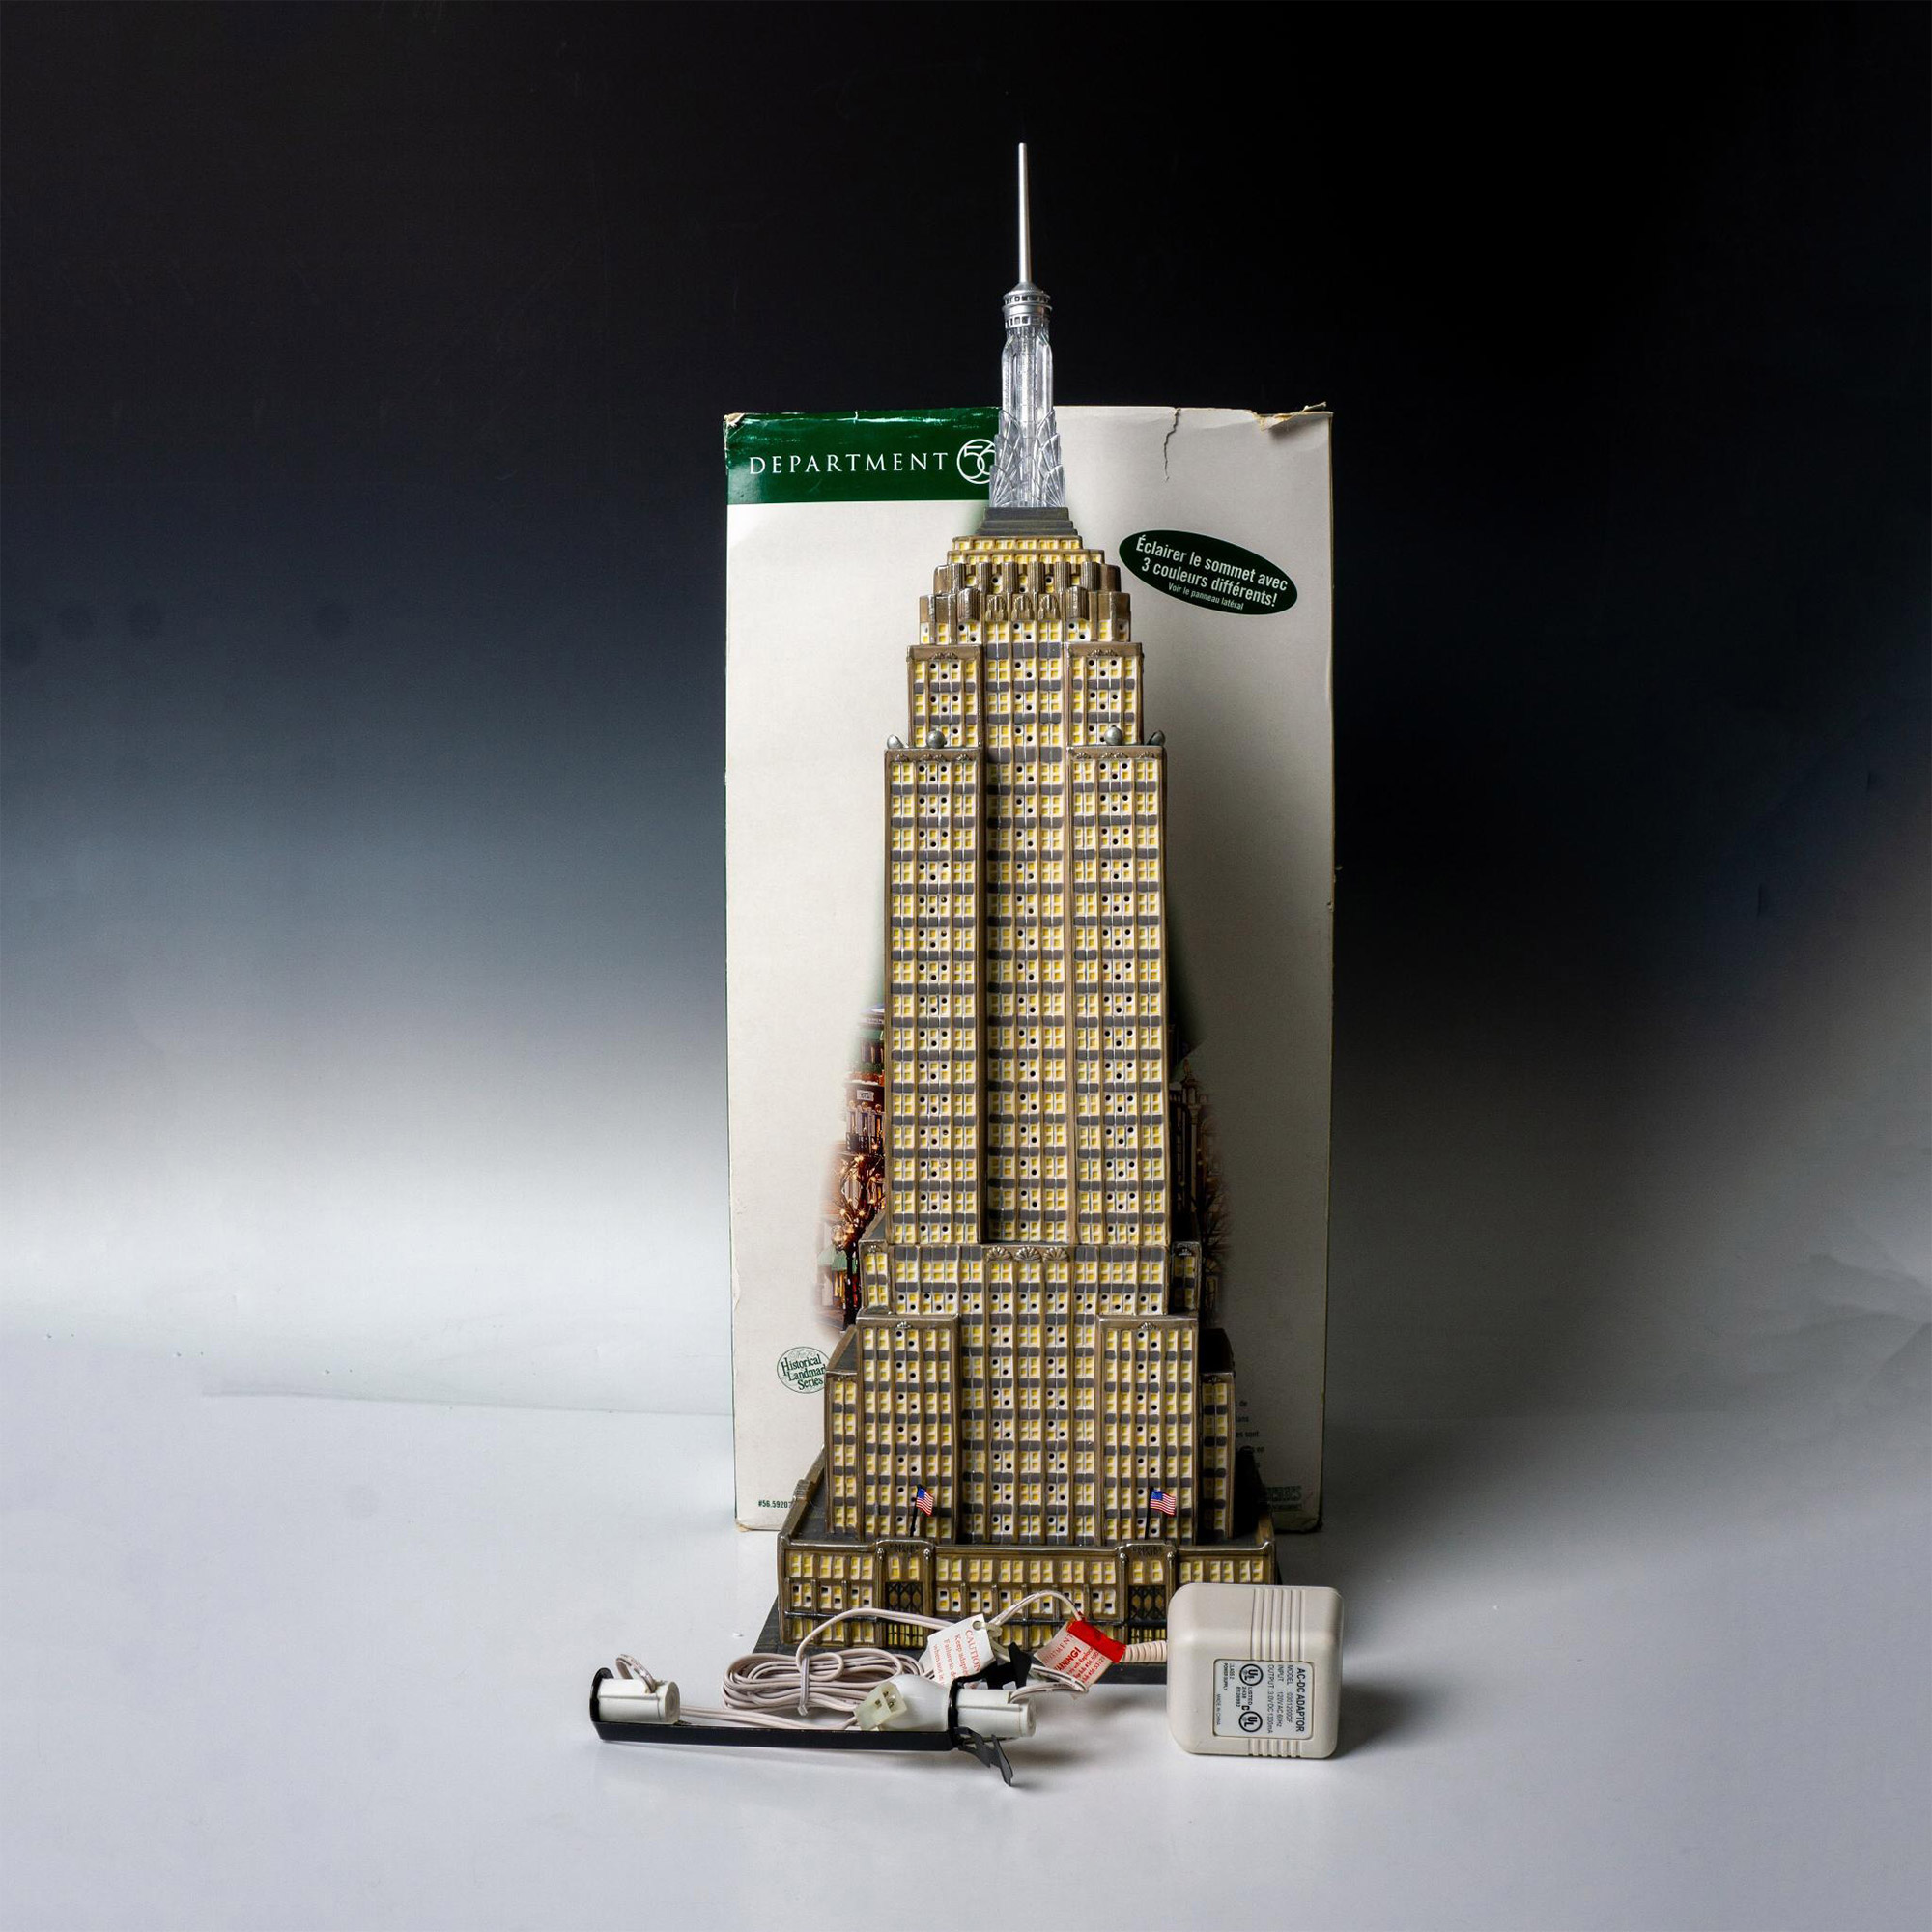 Department 56 Lighted Figurine, Empire State Building - Image 6 of 6